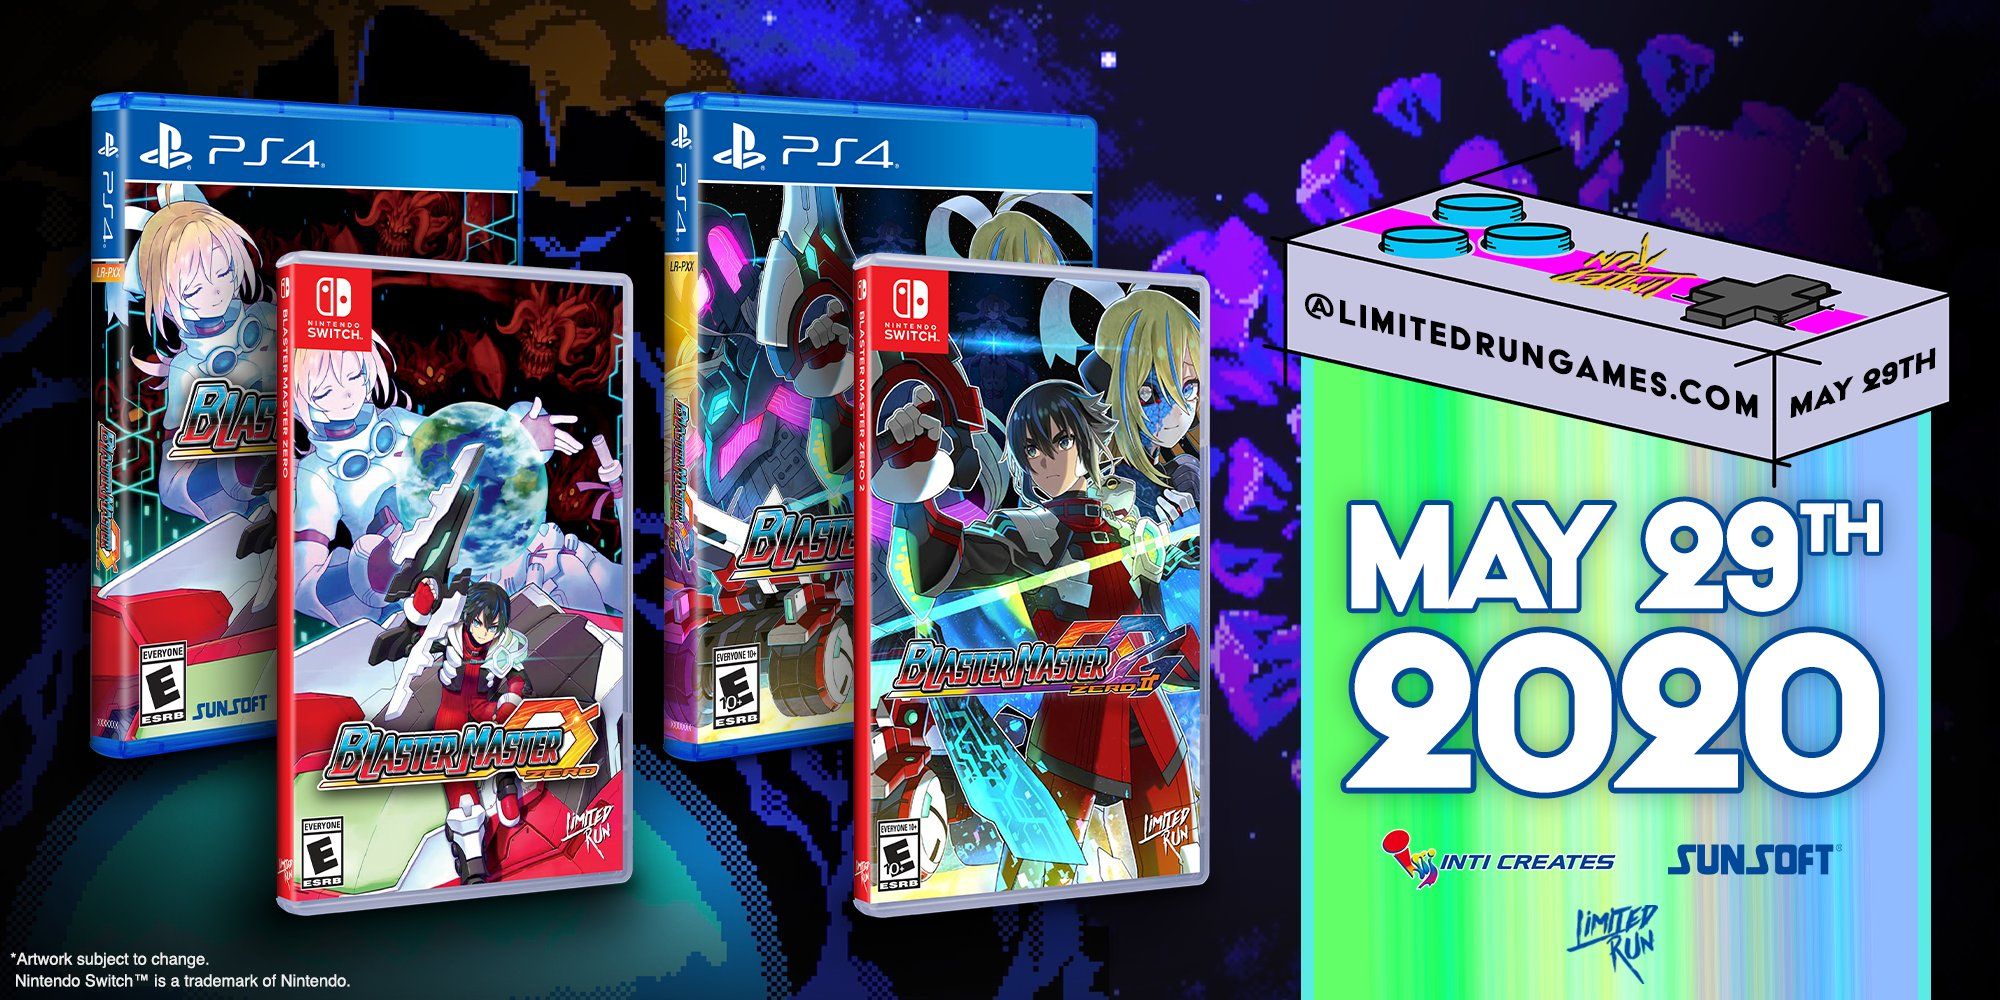 Blaster Master Zero Blaster Master Zero 2 Switch PS4 Limited Run Games